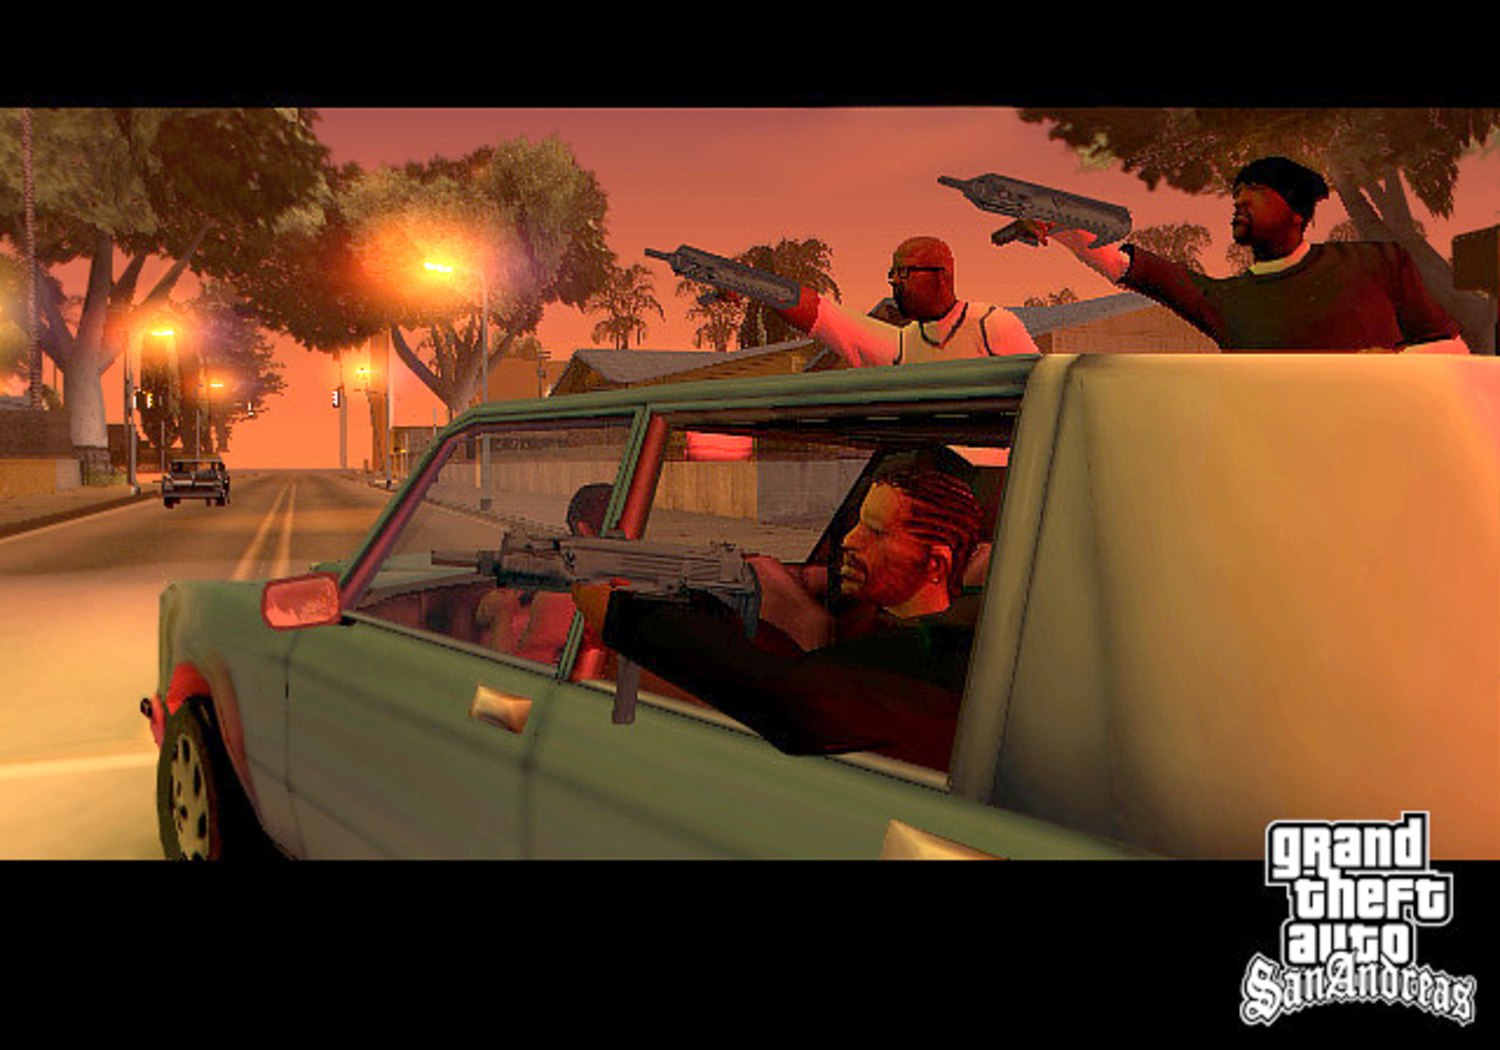 Grand Theft Auto brings real-world club culture to the screen with